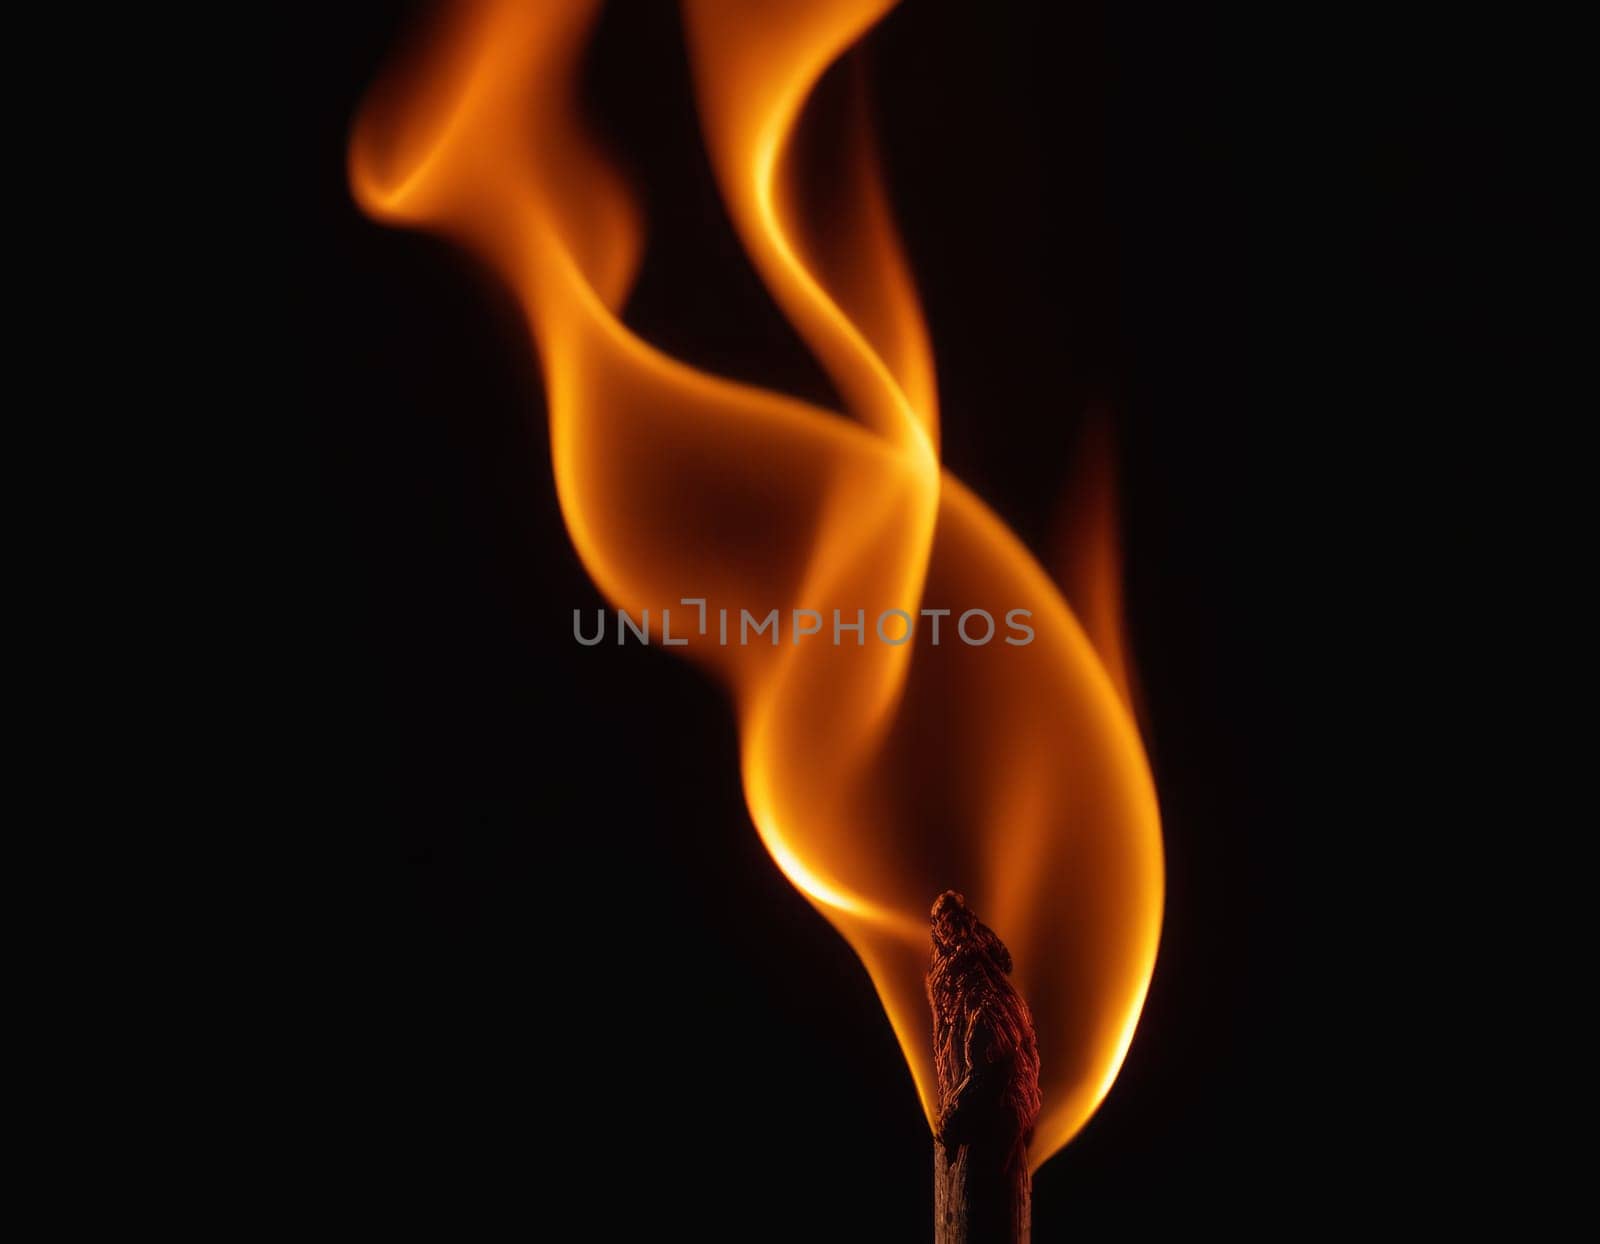 A close-up view of dynamic and intense flames in various shades of orange, yellow, and red, creating a contrast with the dark background and conveying a sense of heat and energy